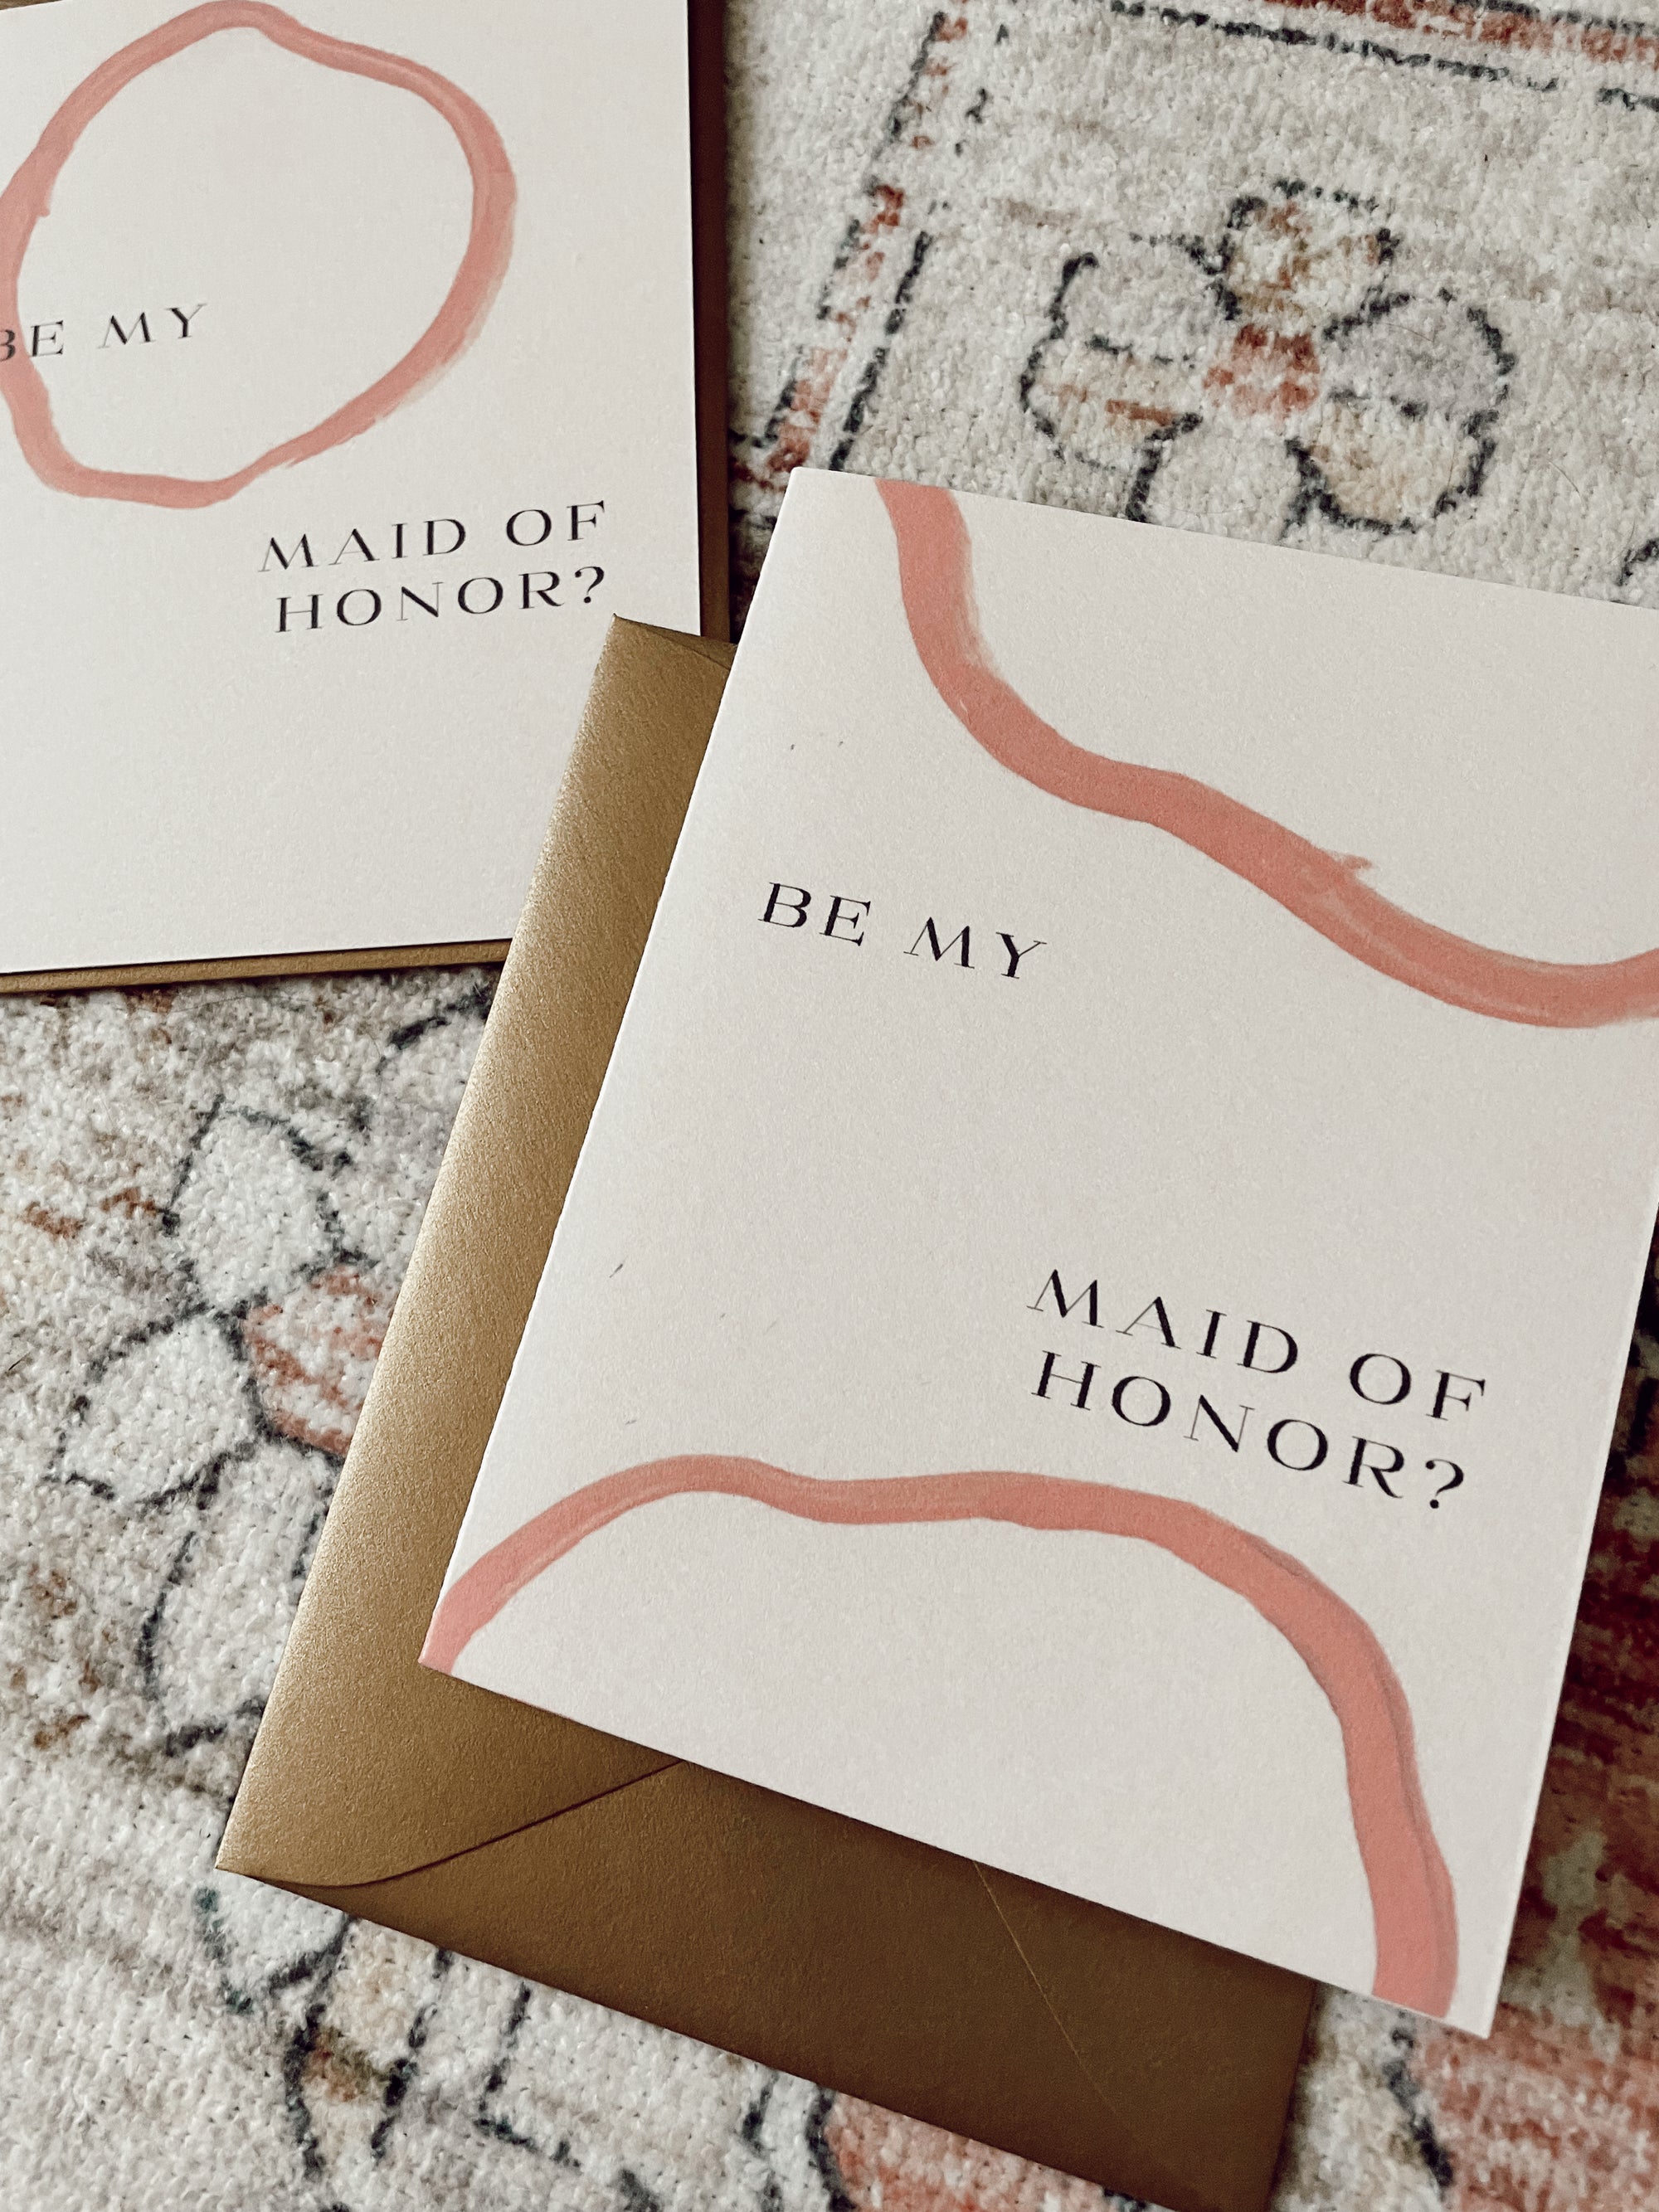 Brushstroke Be My Maid of Honor? Greeting Card